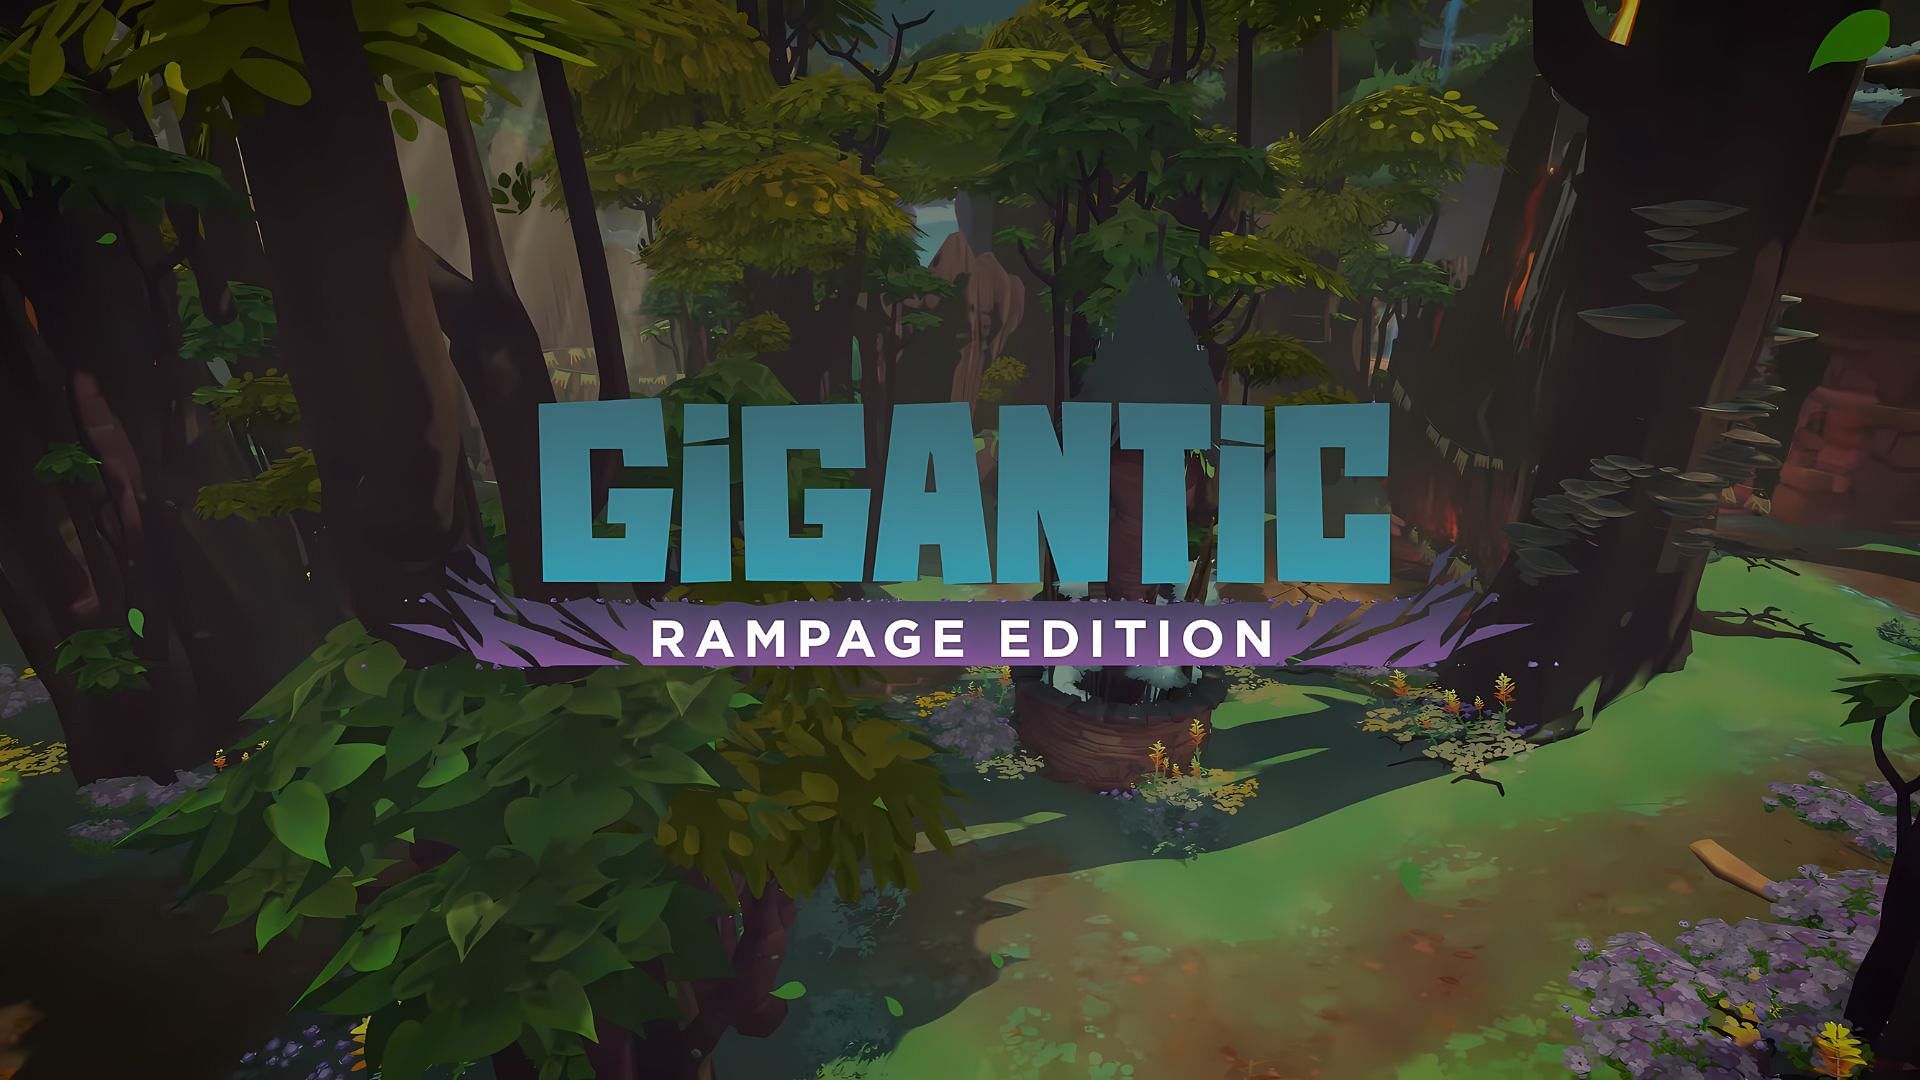 All Roles in Gigantic Rampage Edition explained